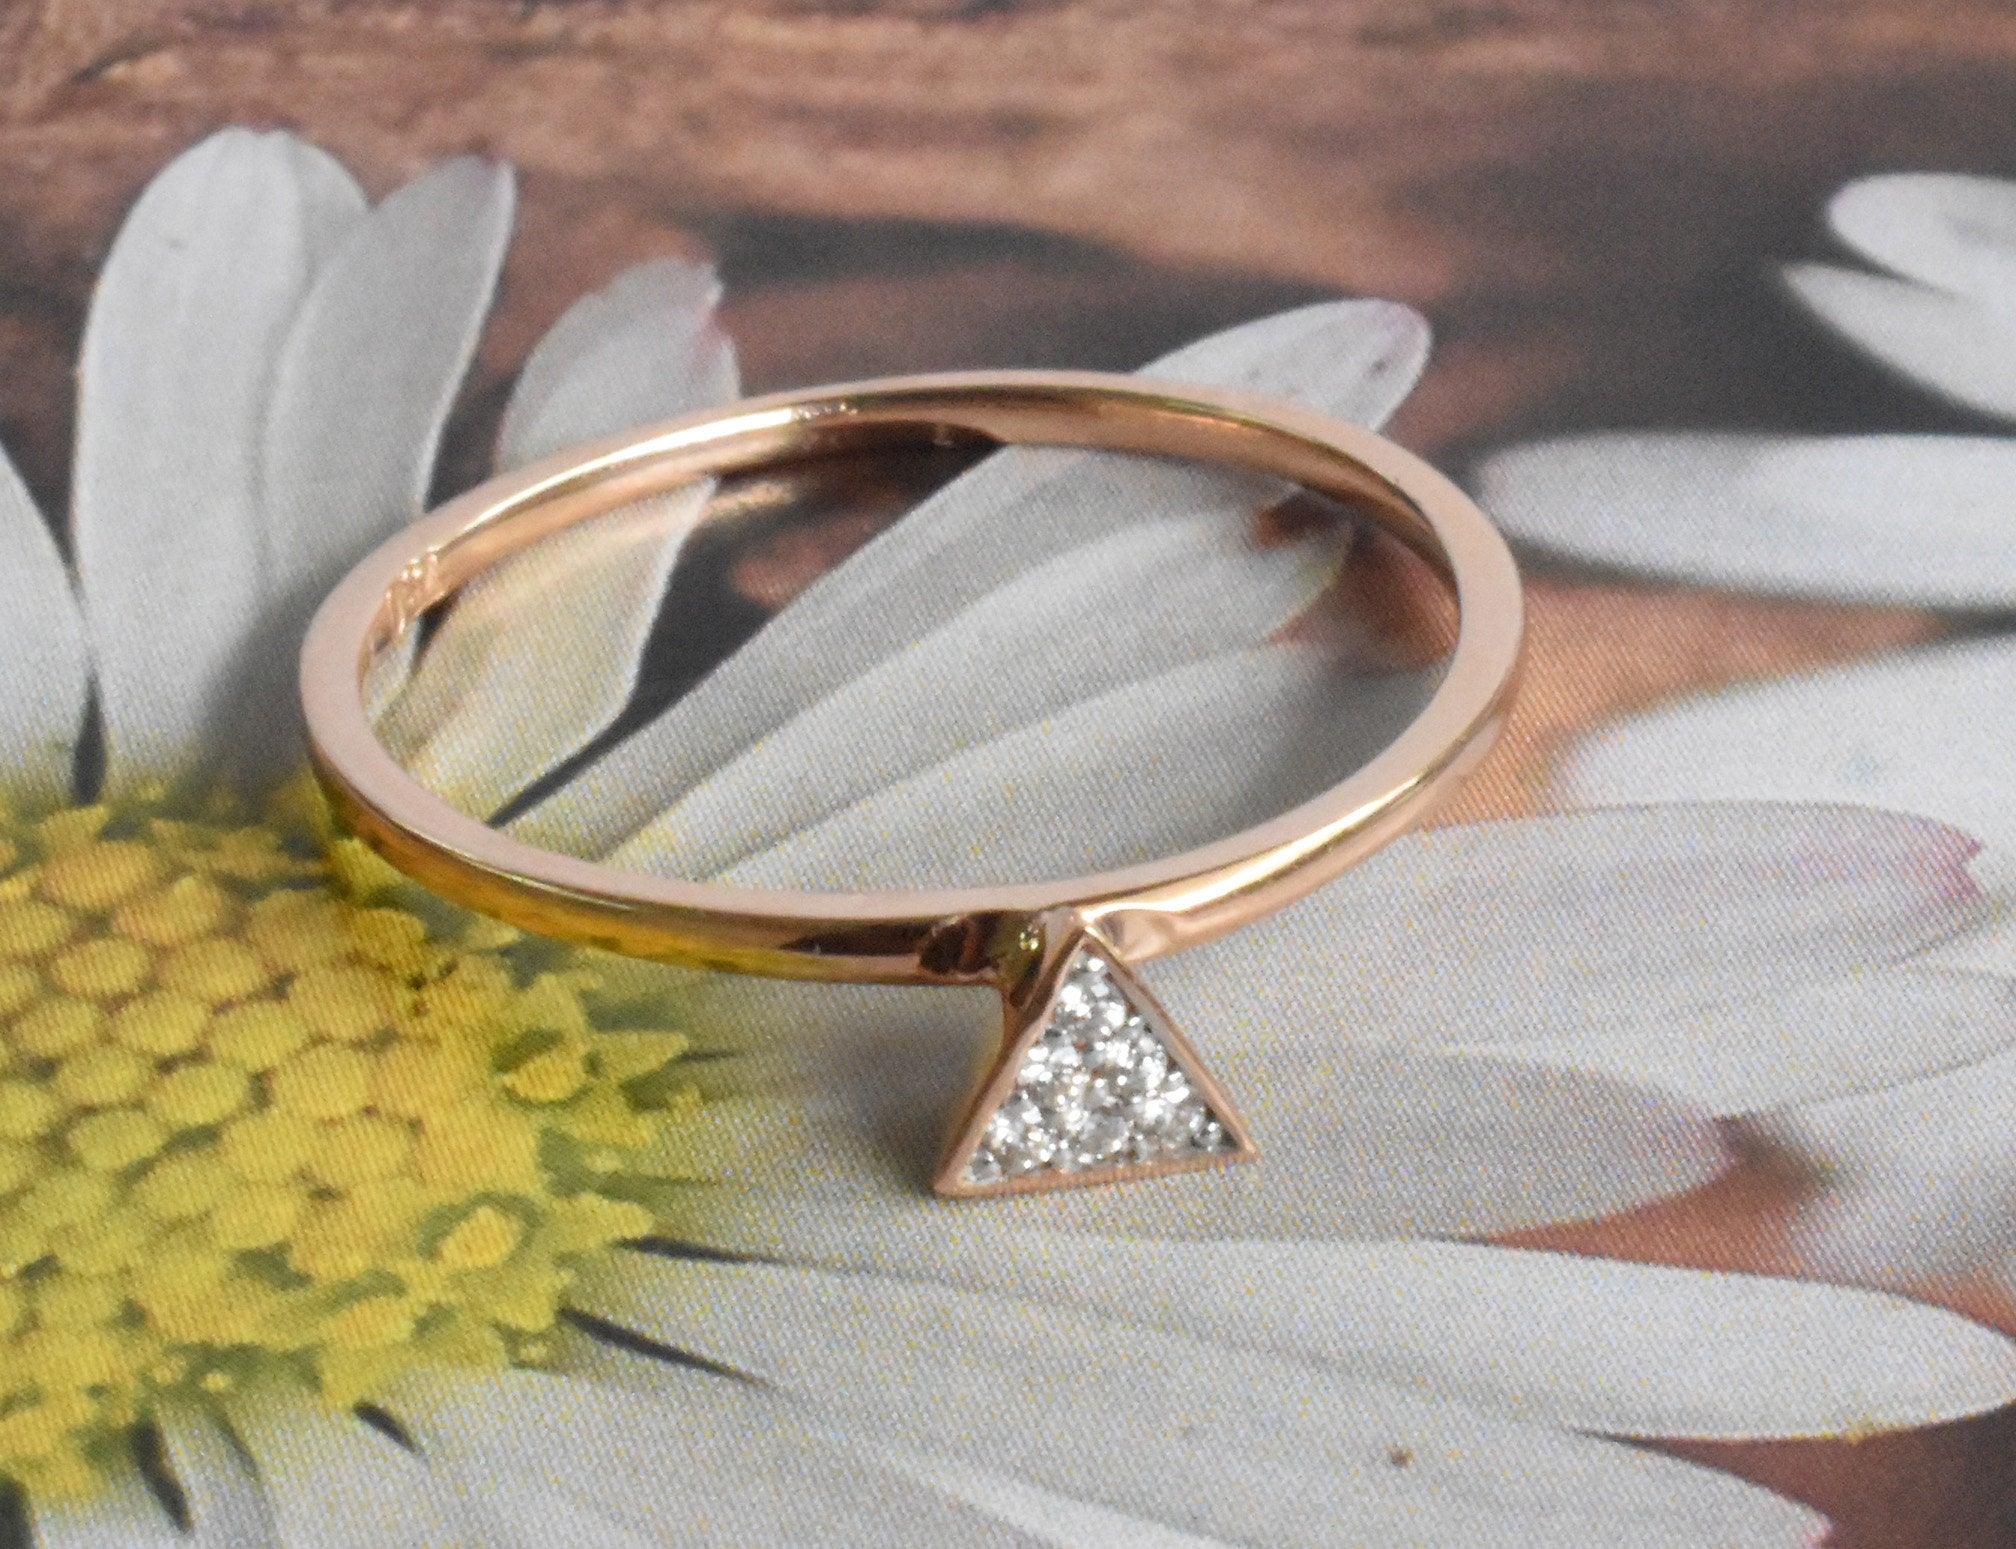 For Sale:  14k Gold Triangle Stacking Ring with White Pave Diamonds Minimalist Ring 5